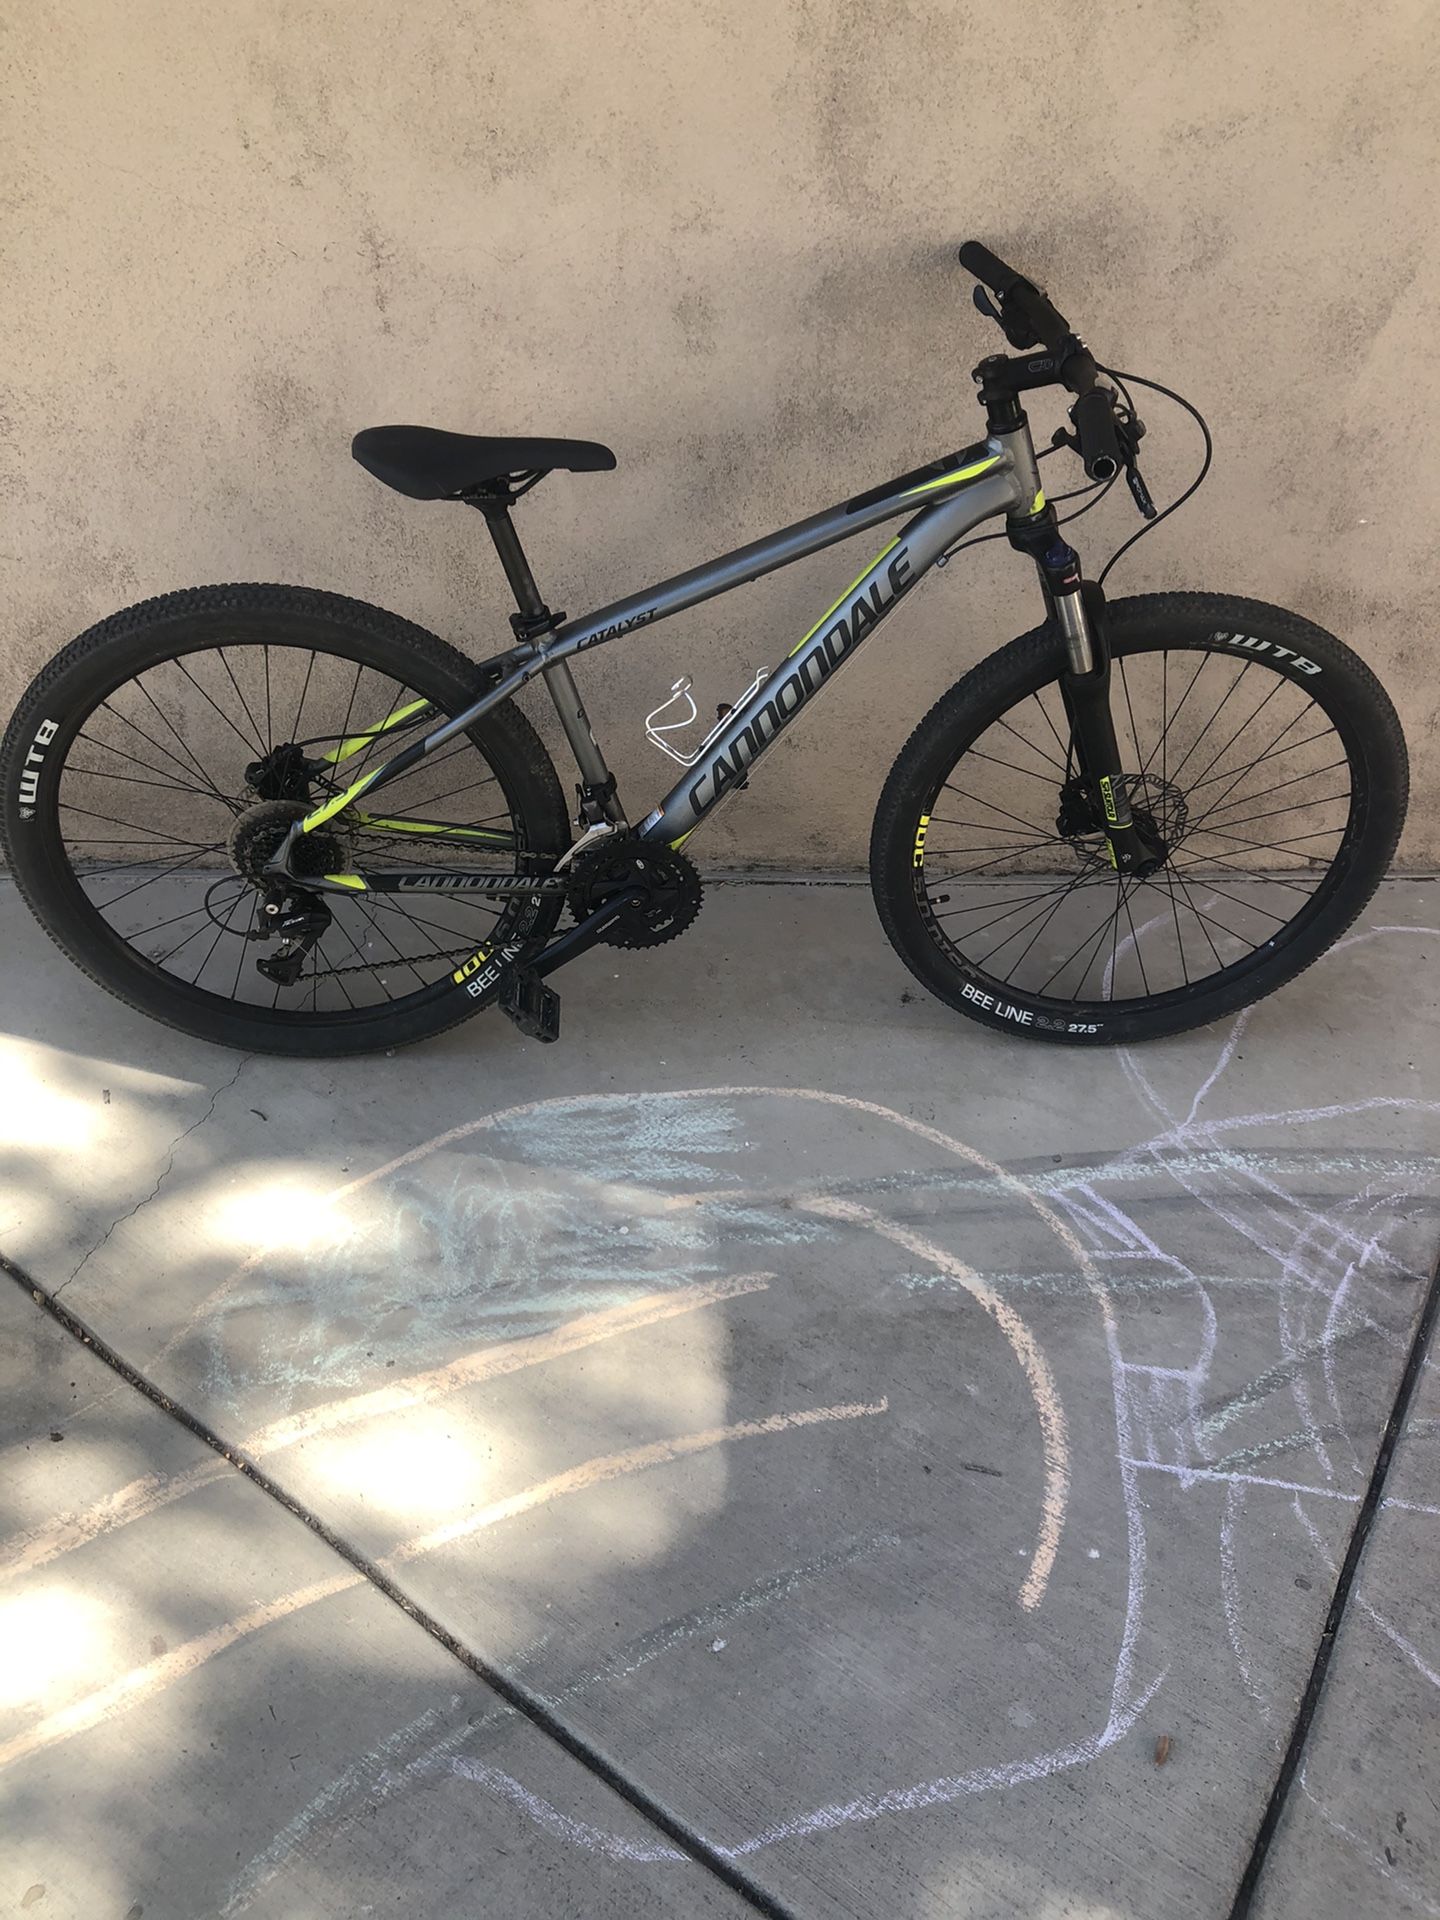 Cannondale Catalyst Mountain Bike